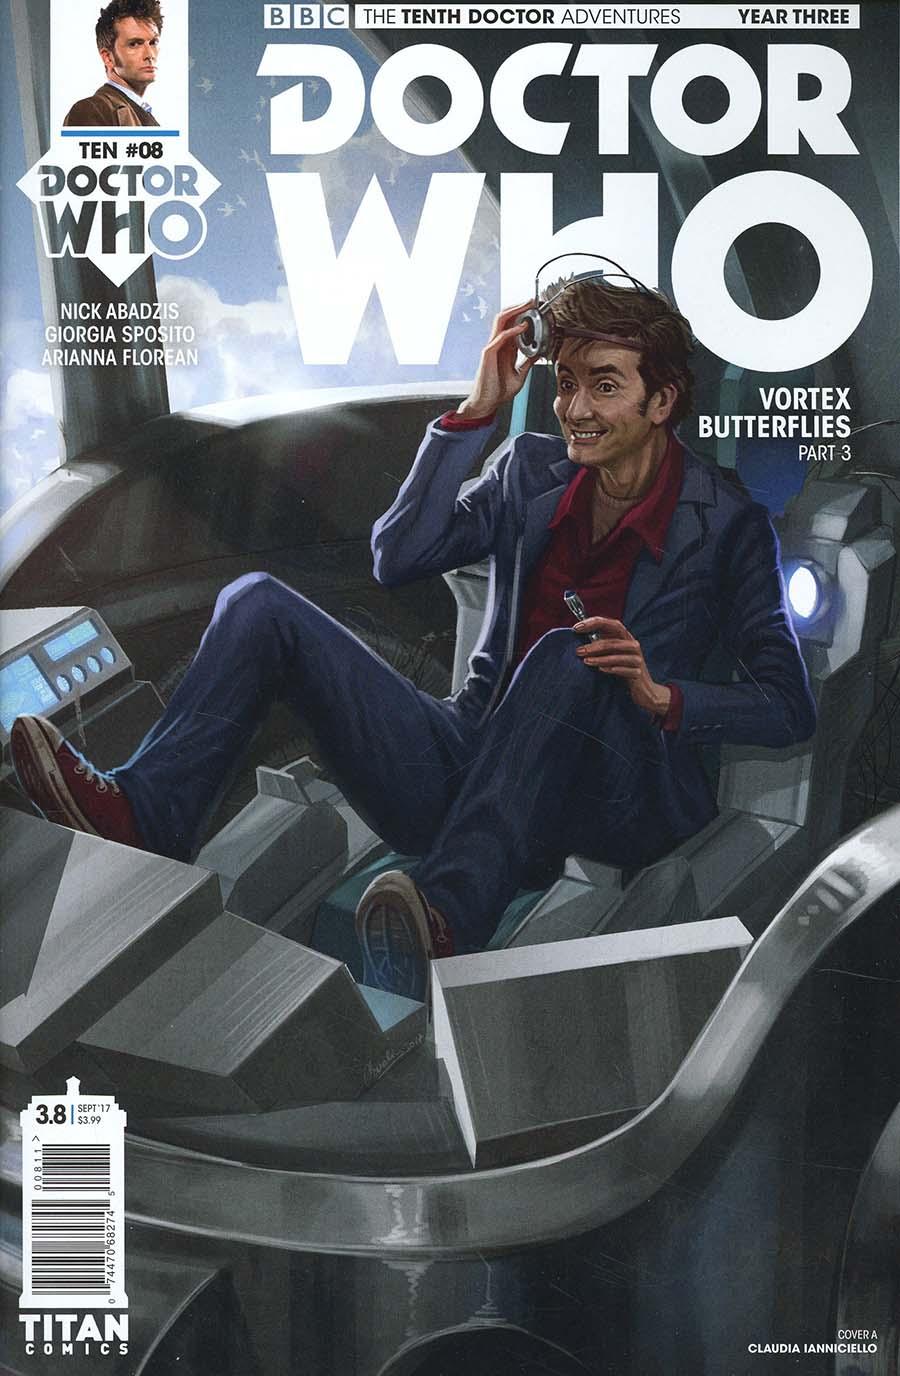 Doctor Who 10th Doctor Year Three Vol. 1 #8